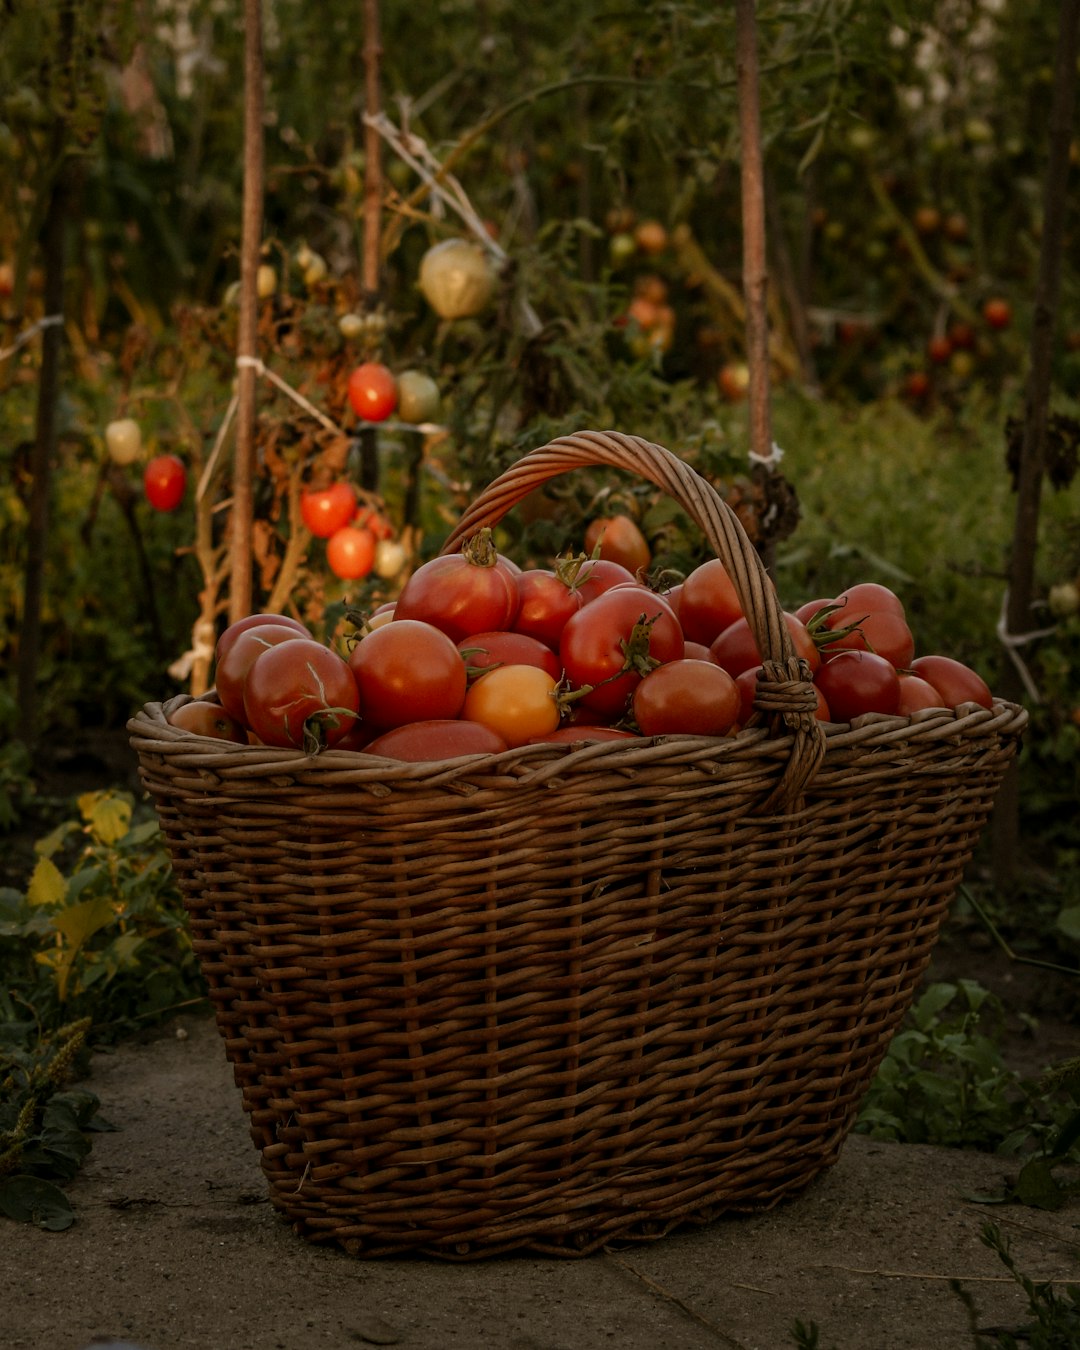 red and yellow round fruits in brown woven basket